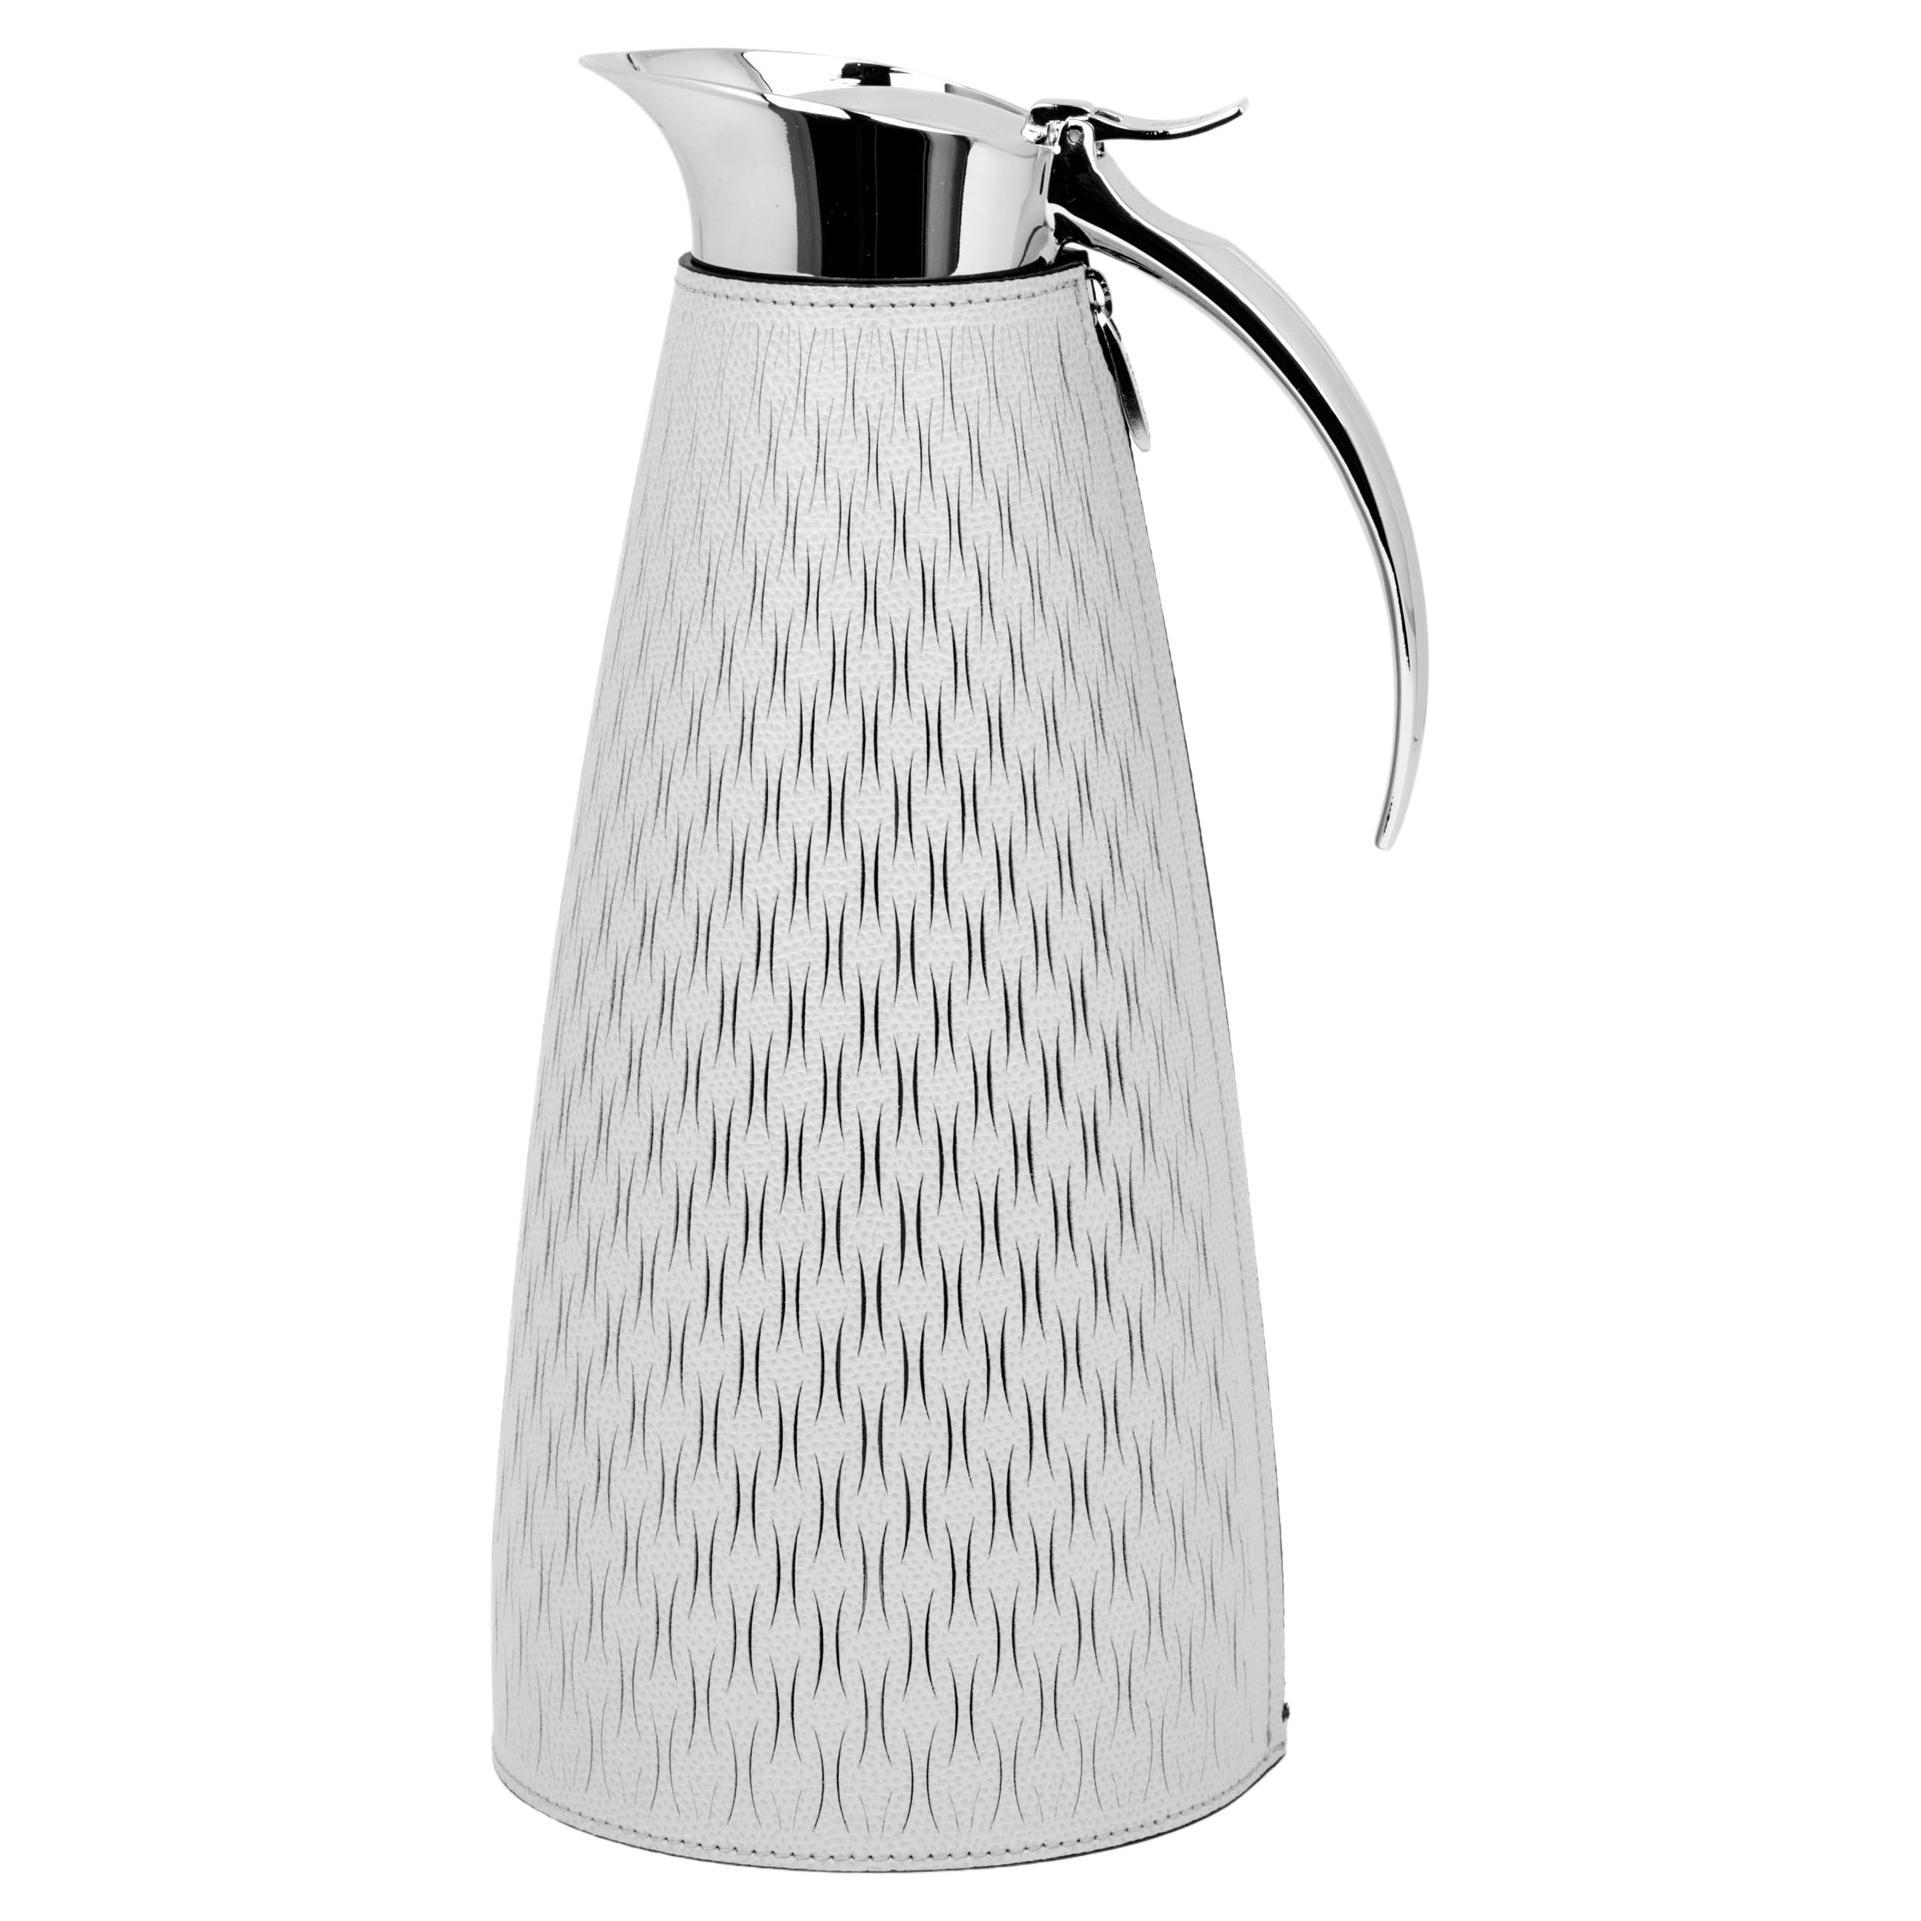 21st Century Steel Thermal Carafe Style with Grey Cover Handcrafed in Italy